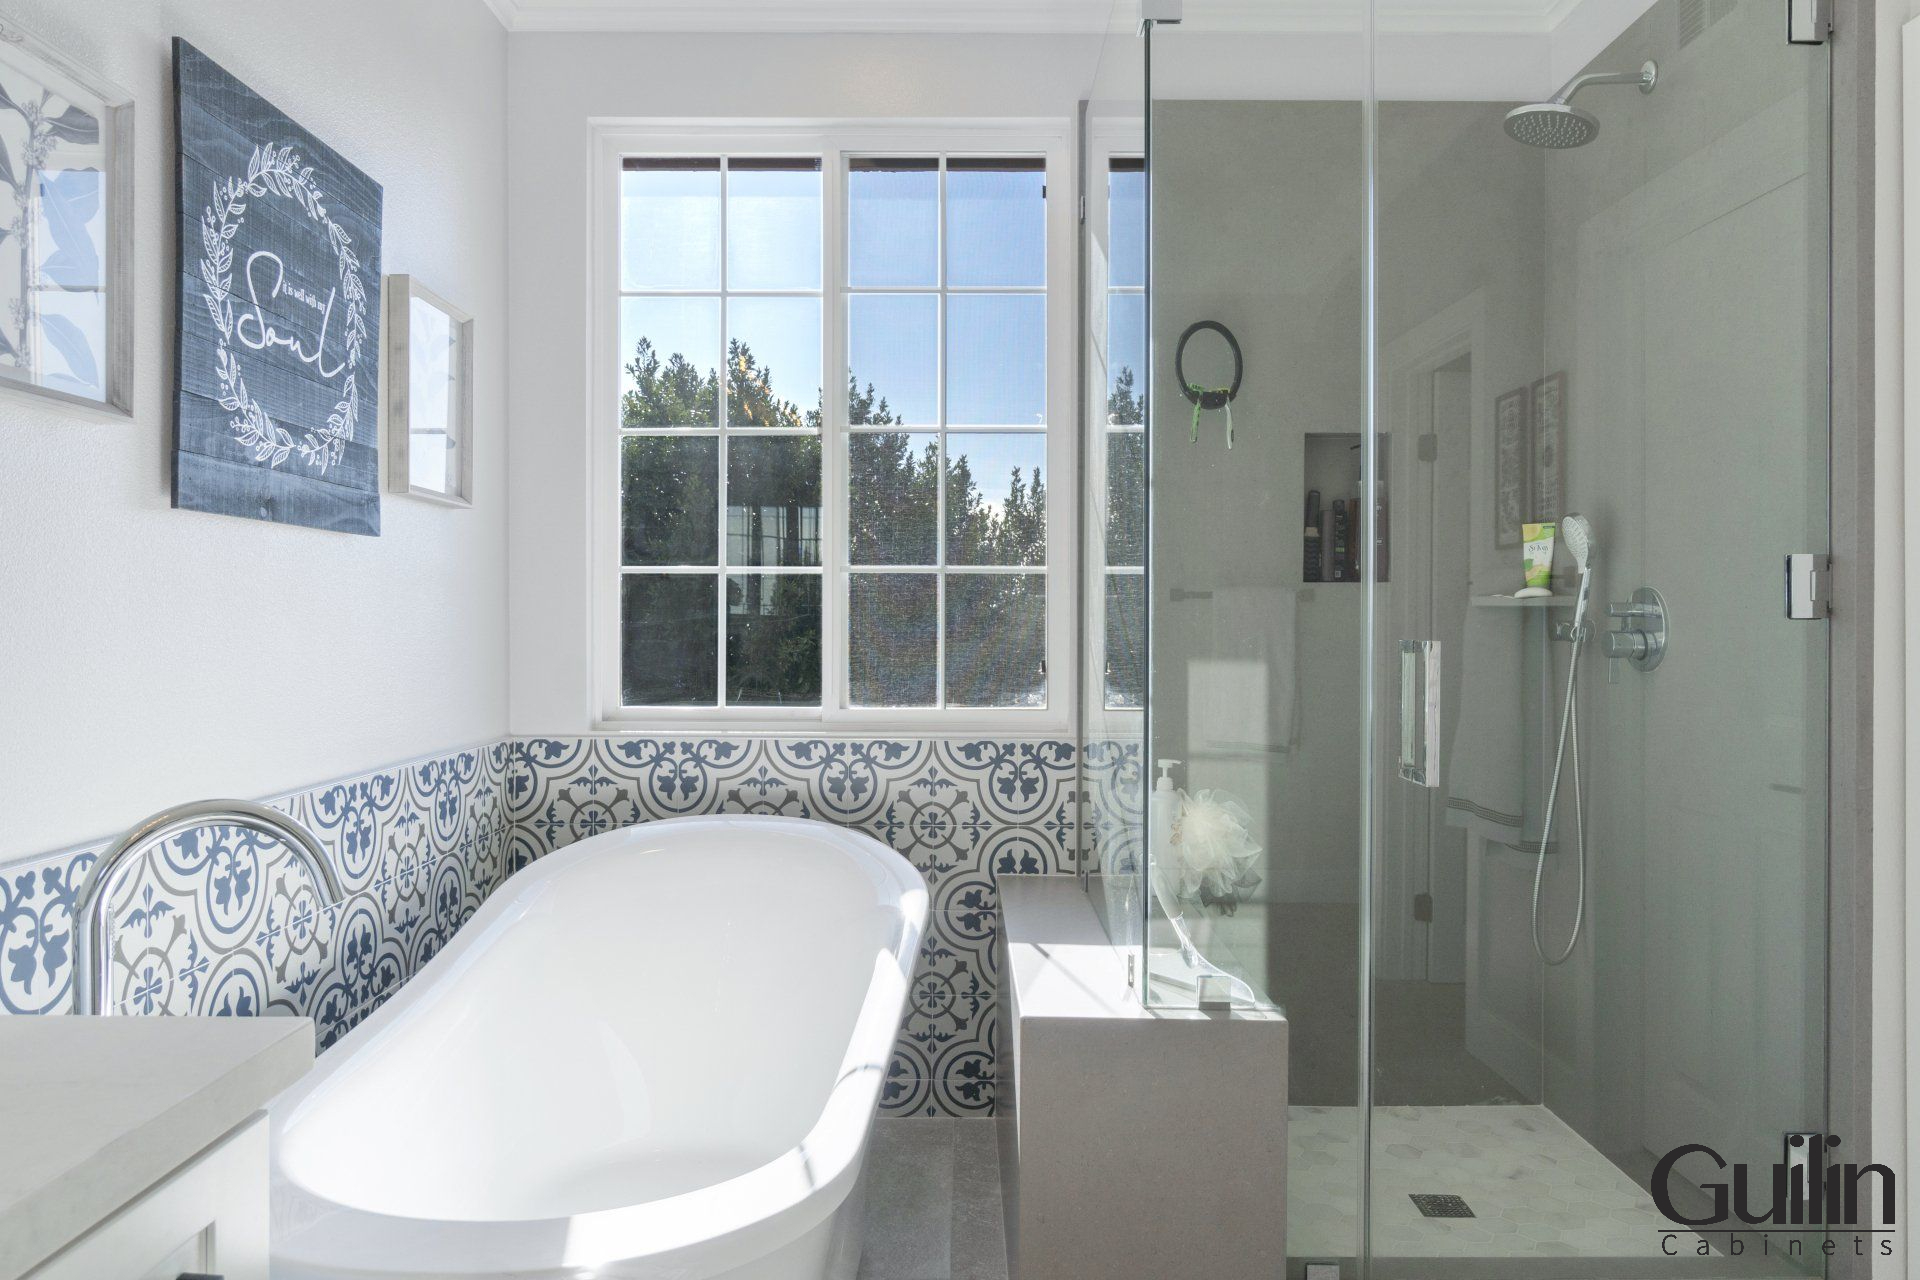 Beach theme: blues. sand tones colors - The Bathroom Project by Guilin Cabinets